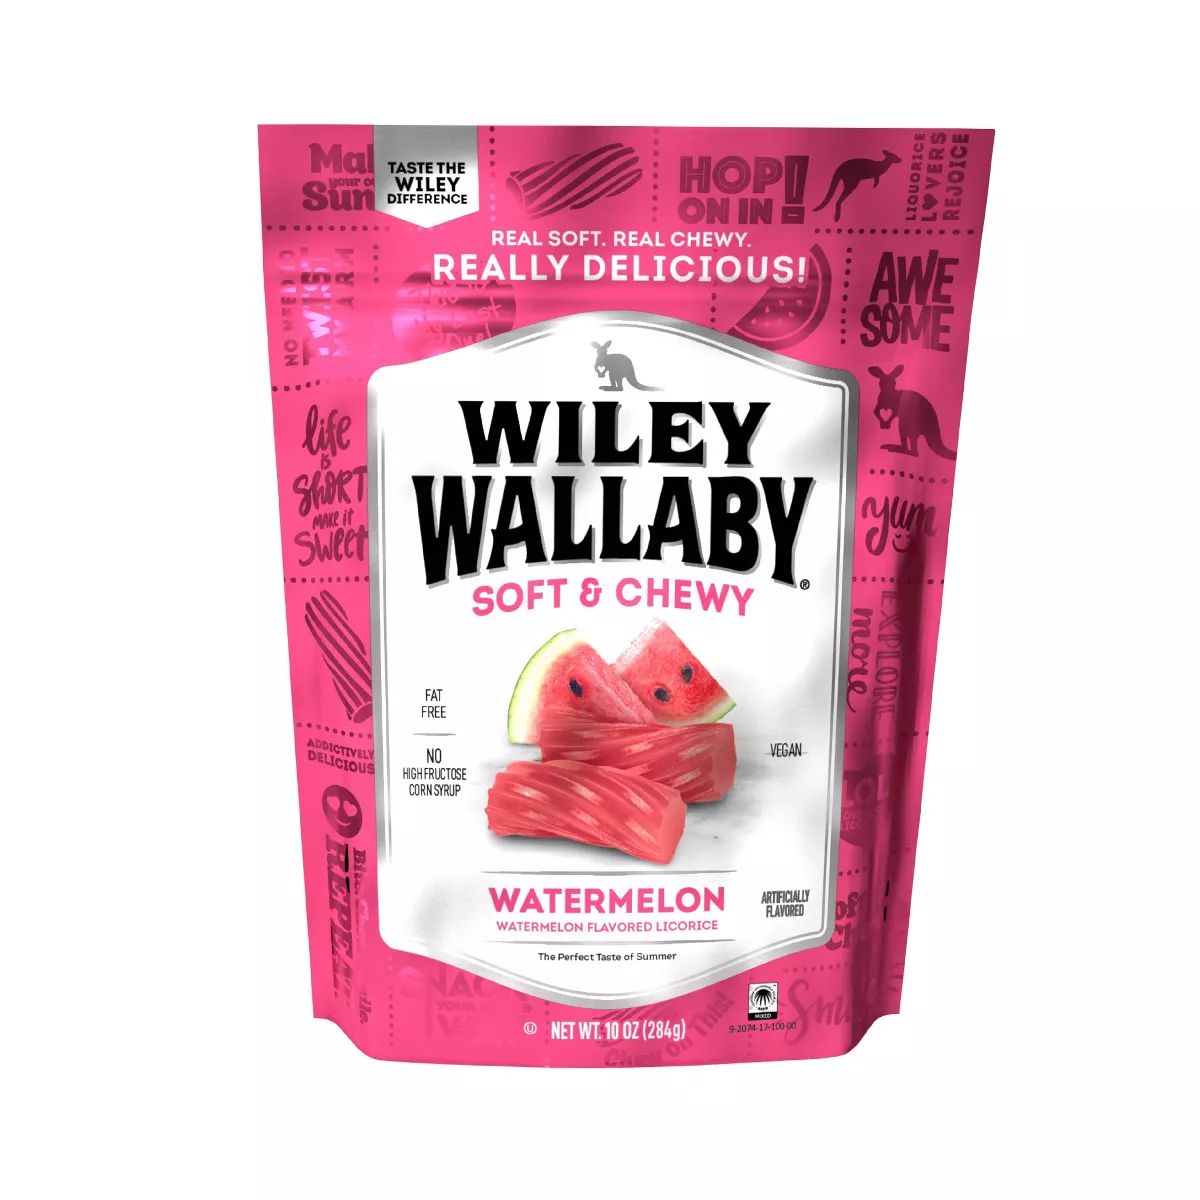 Wiley Wallaby Candy Watermelon Licorice - 10oz | Target